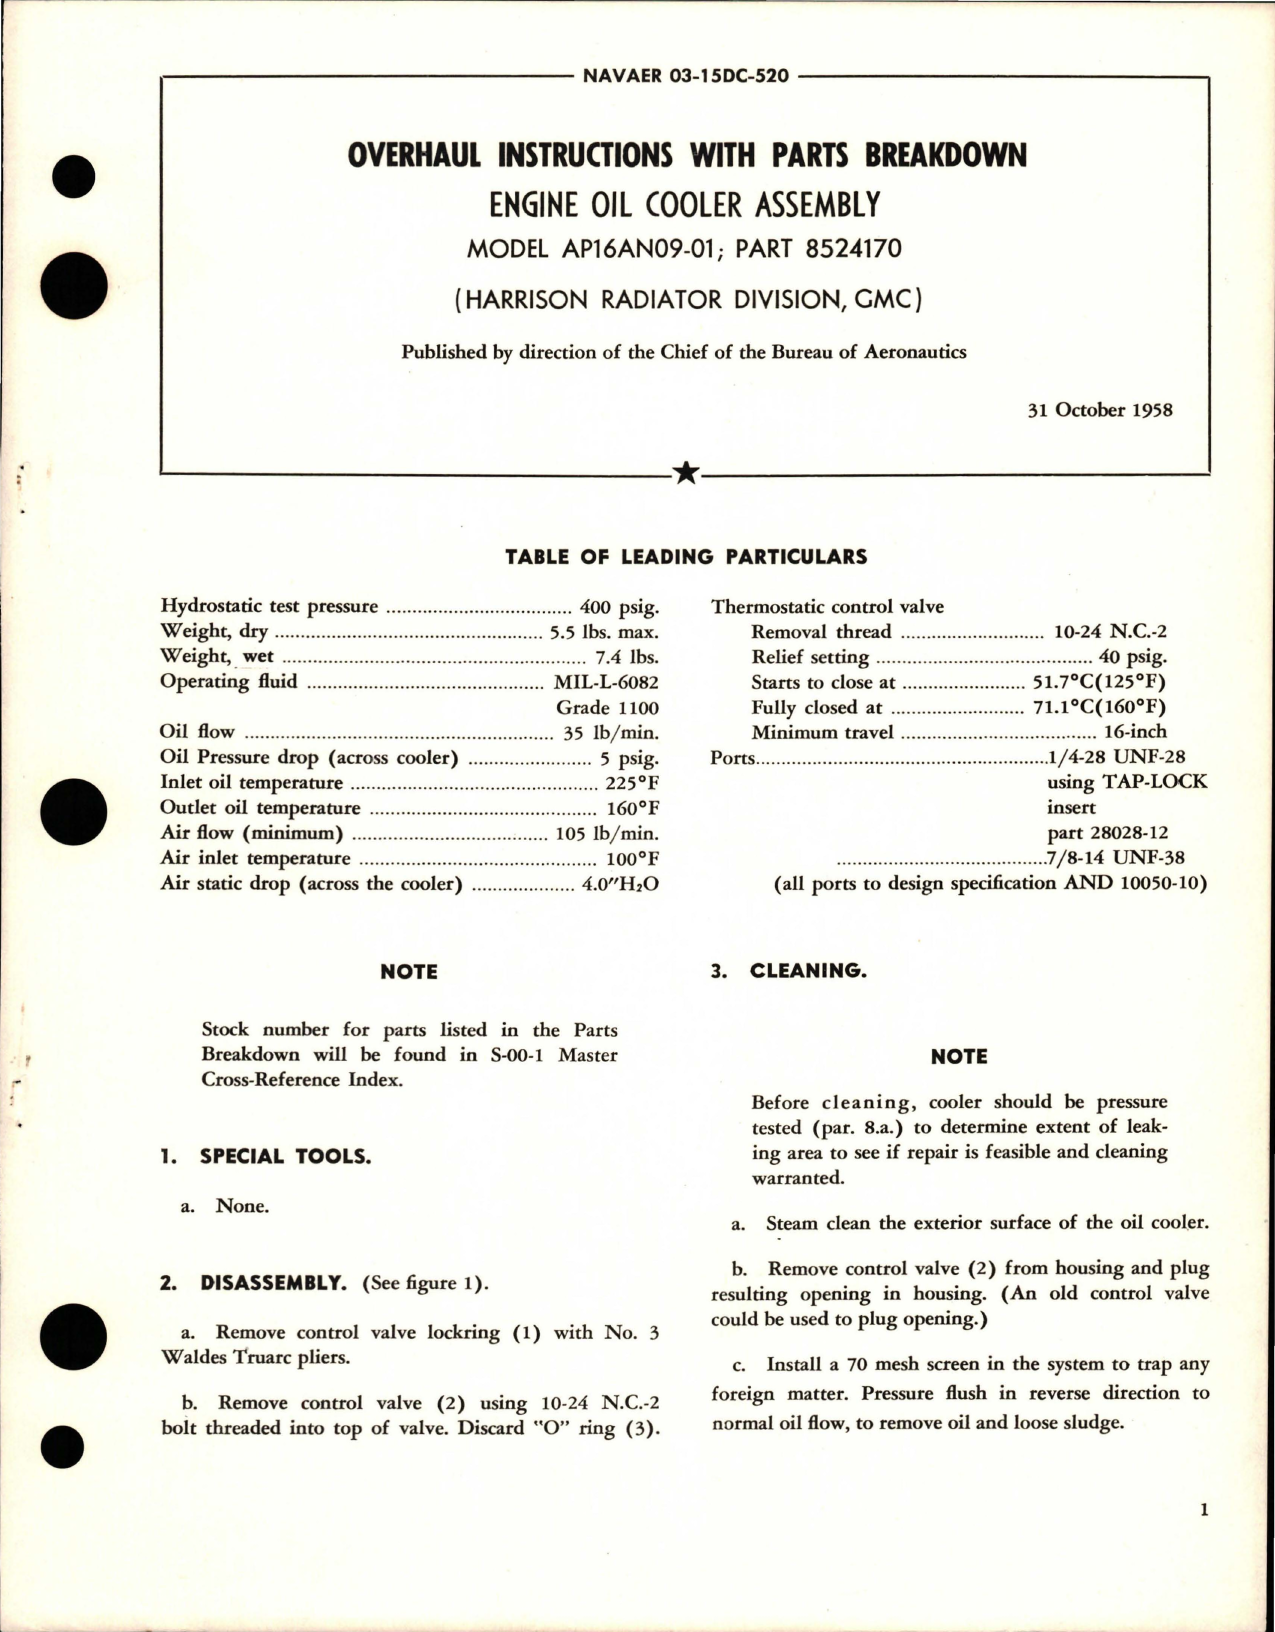 Sample page 1 from AirCorps Library document: Overhaul Instructions with Parts Breakdown for Engine Oil Cooler Assembly - Model AP16AN09-01 - Part 8524170